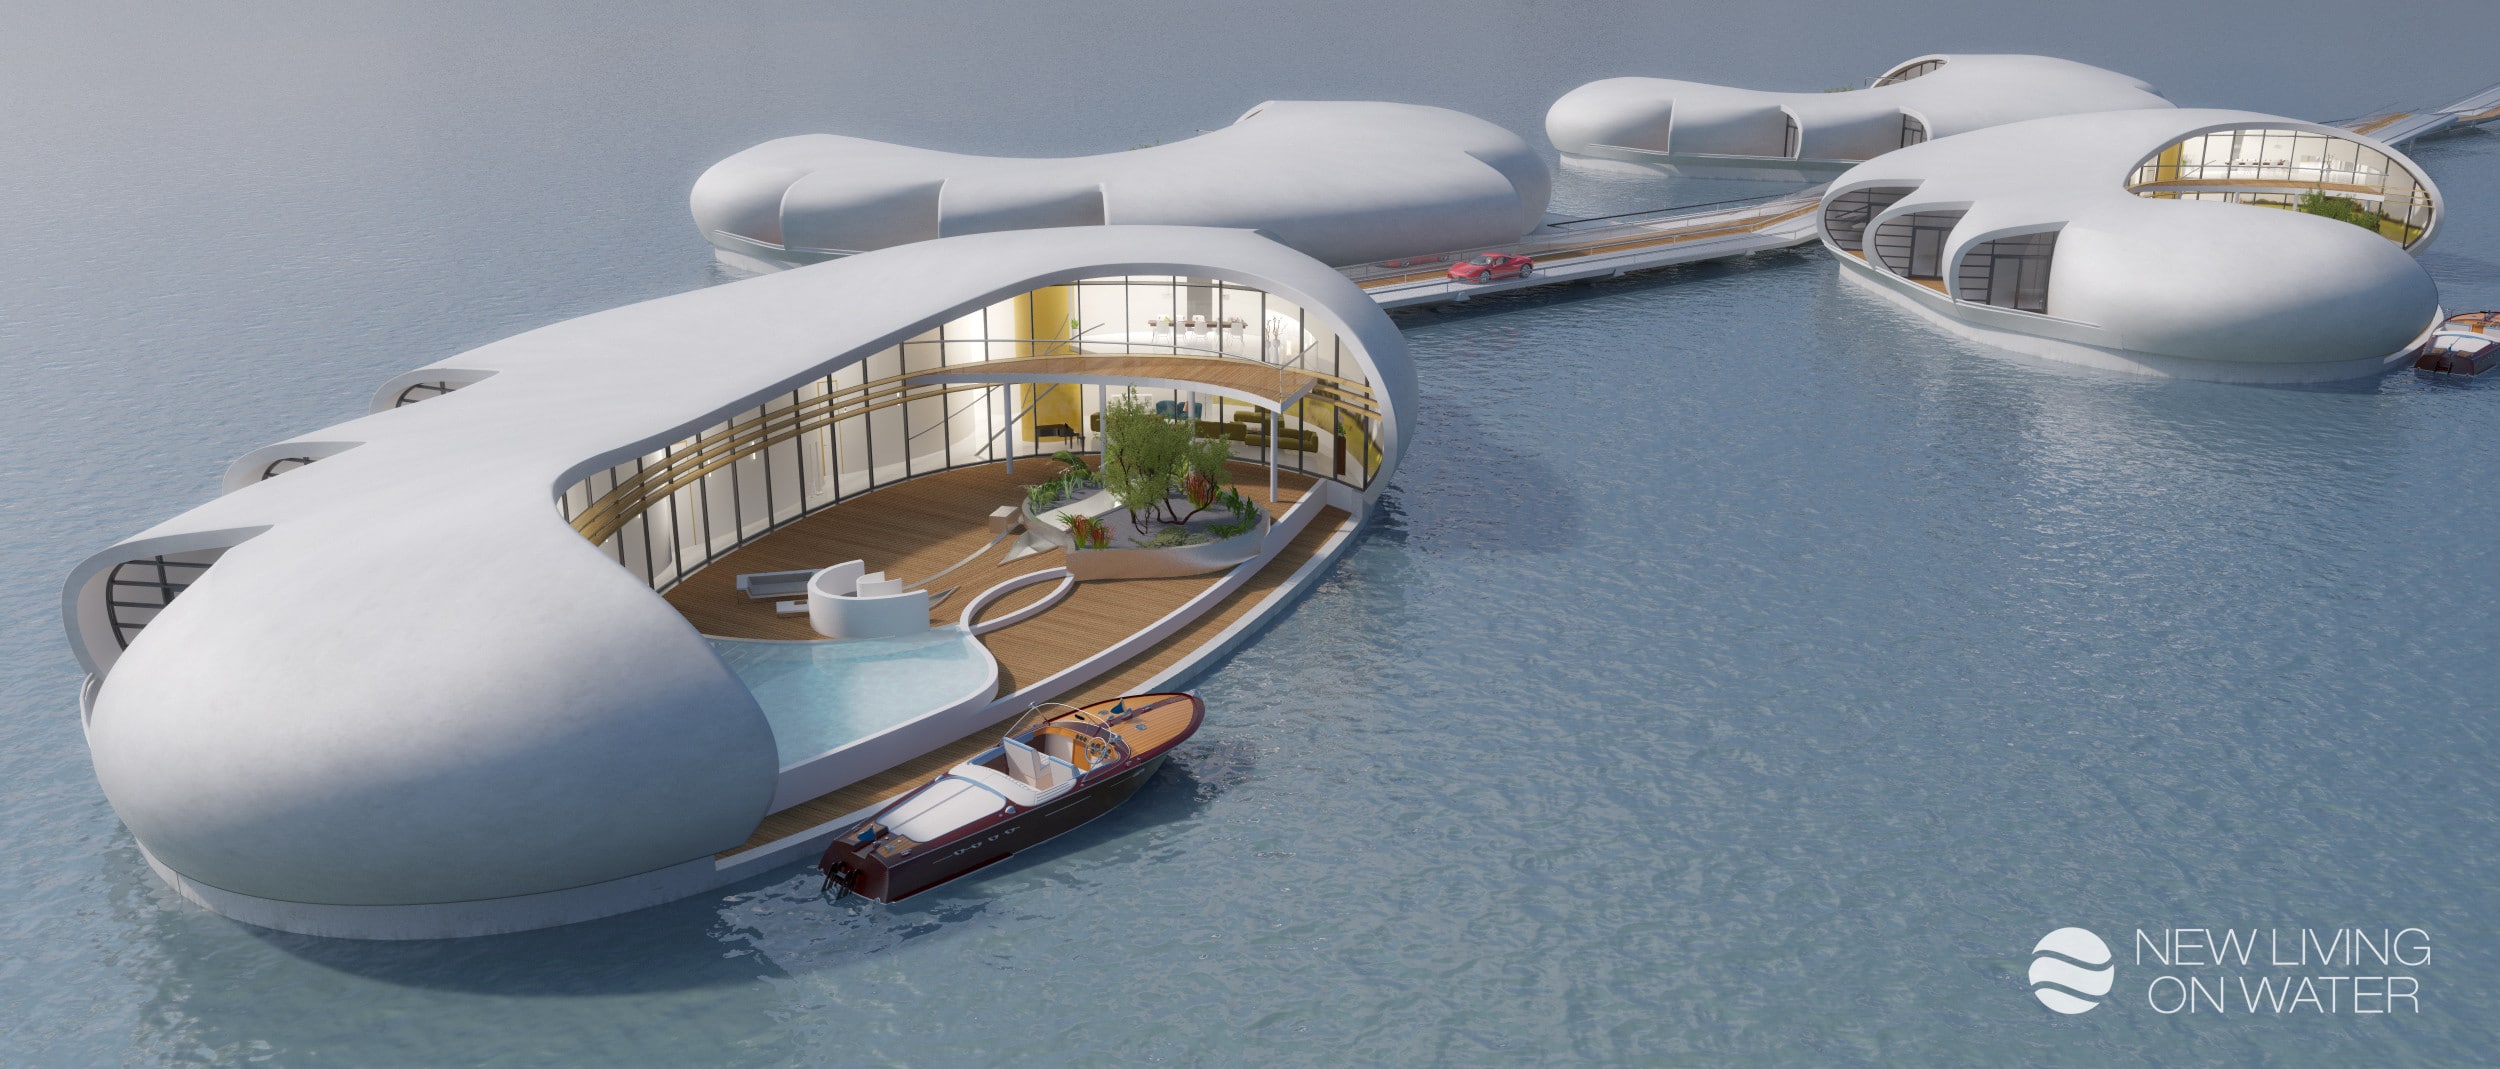 Dubai To Be Springboard For Floating Homes Taking Owners Back To Nature